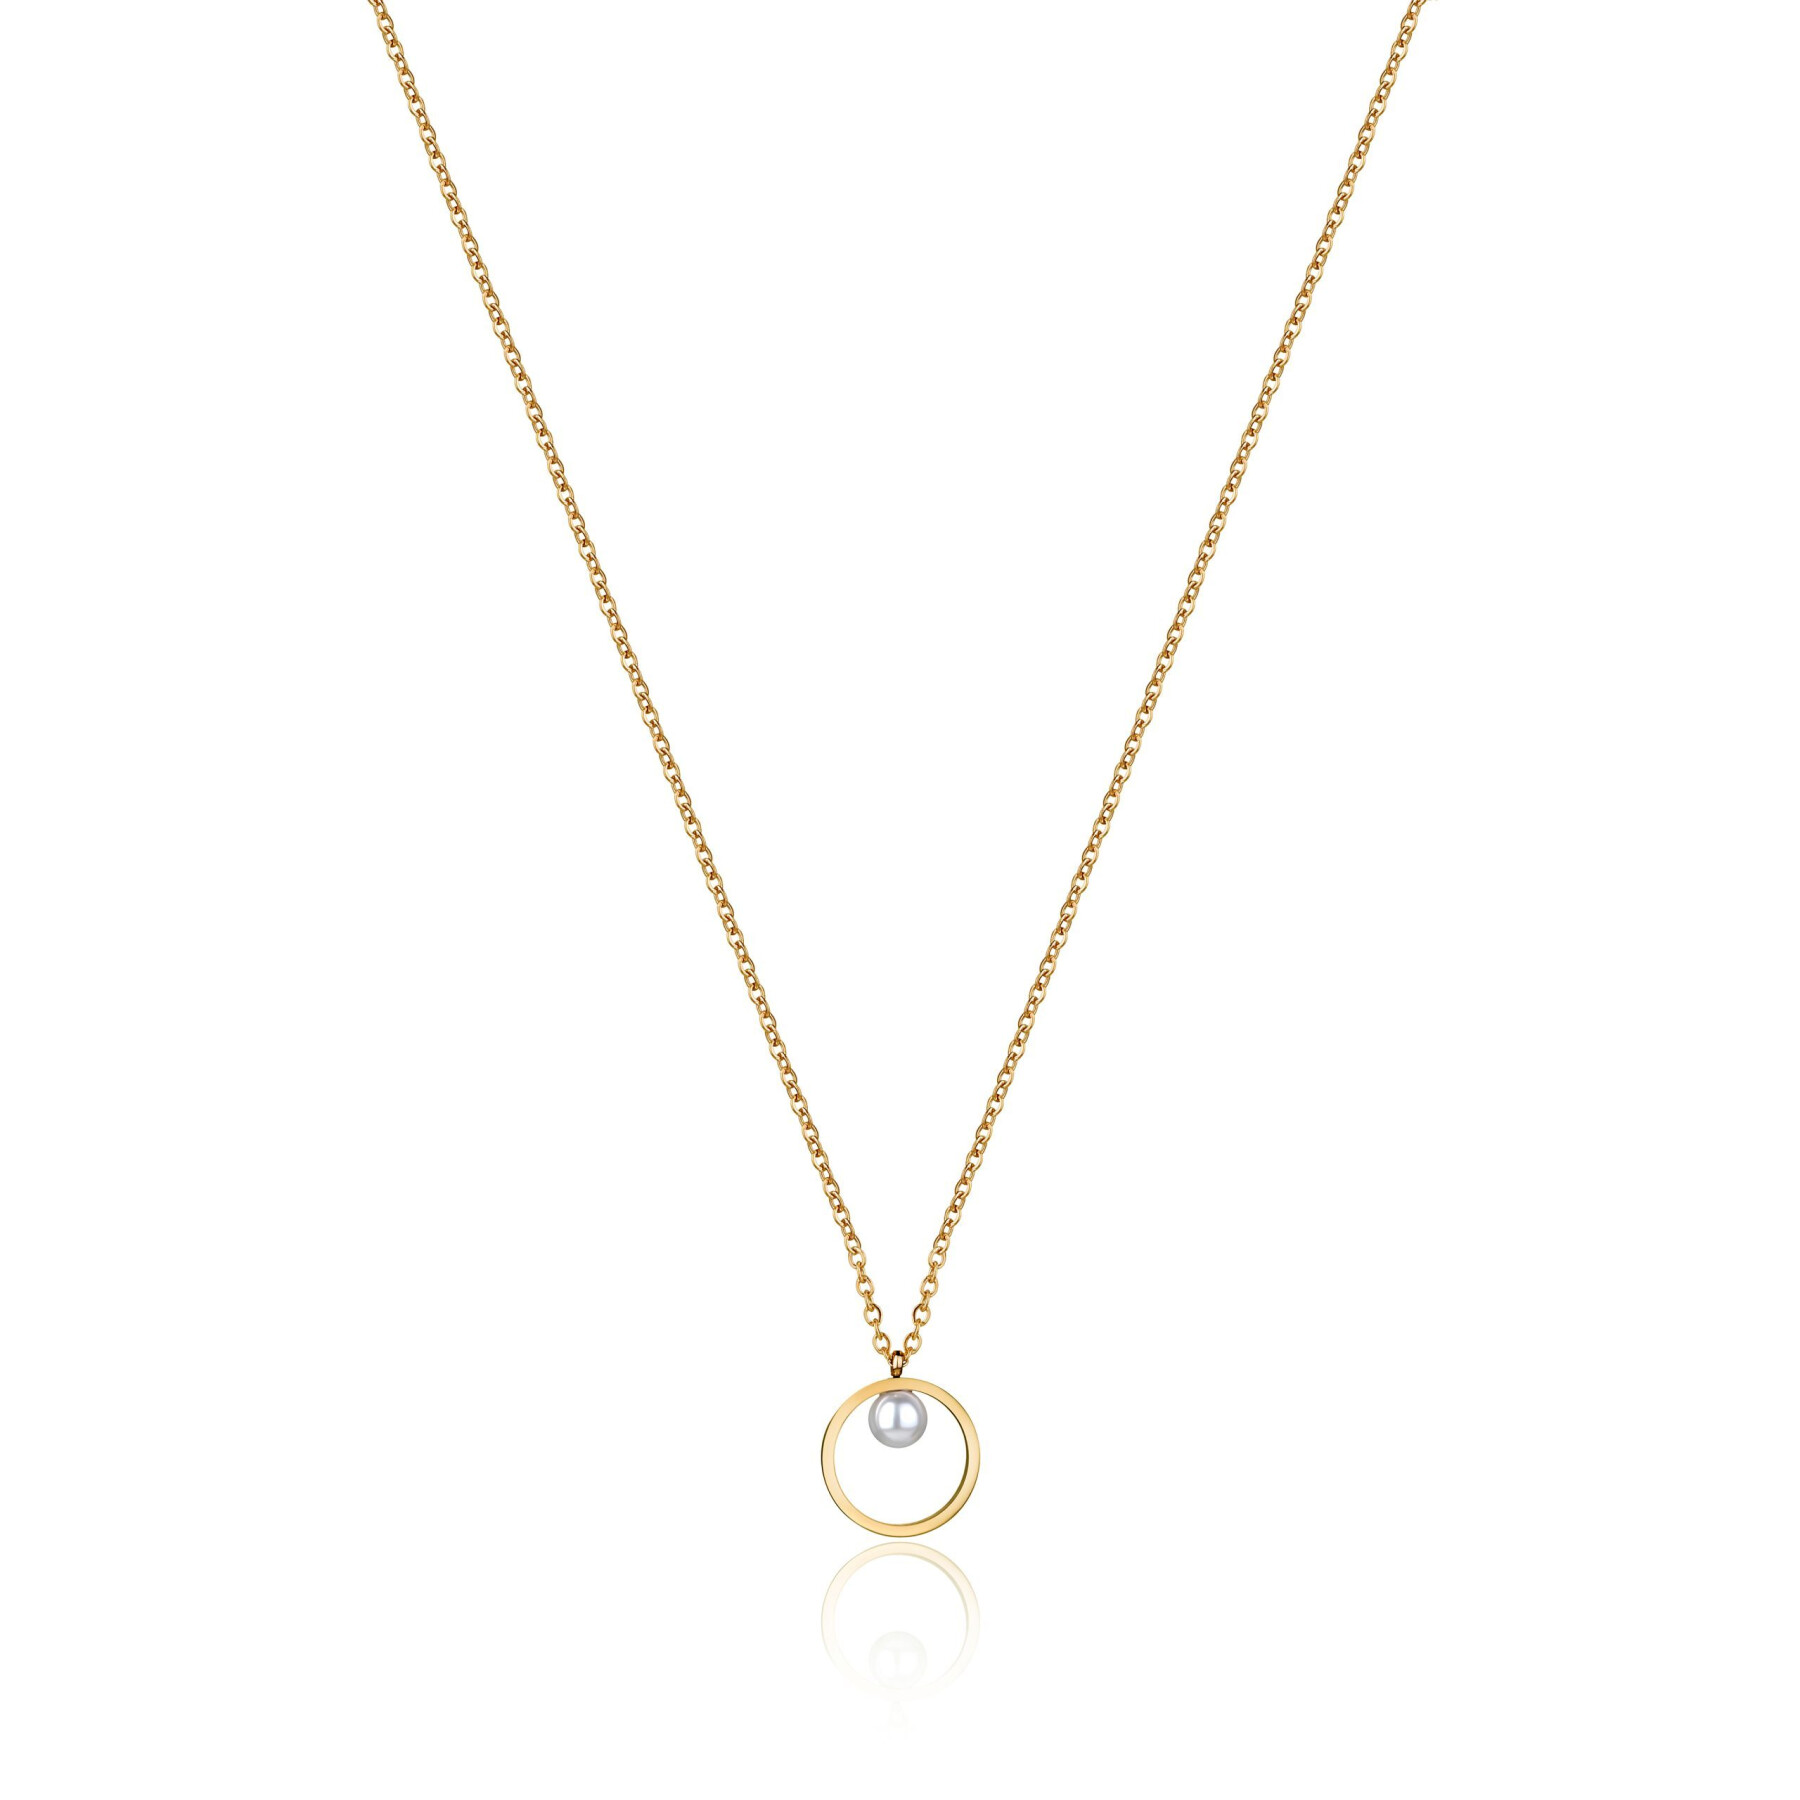 Women's necklace Isabella Ford Lea